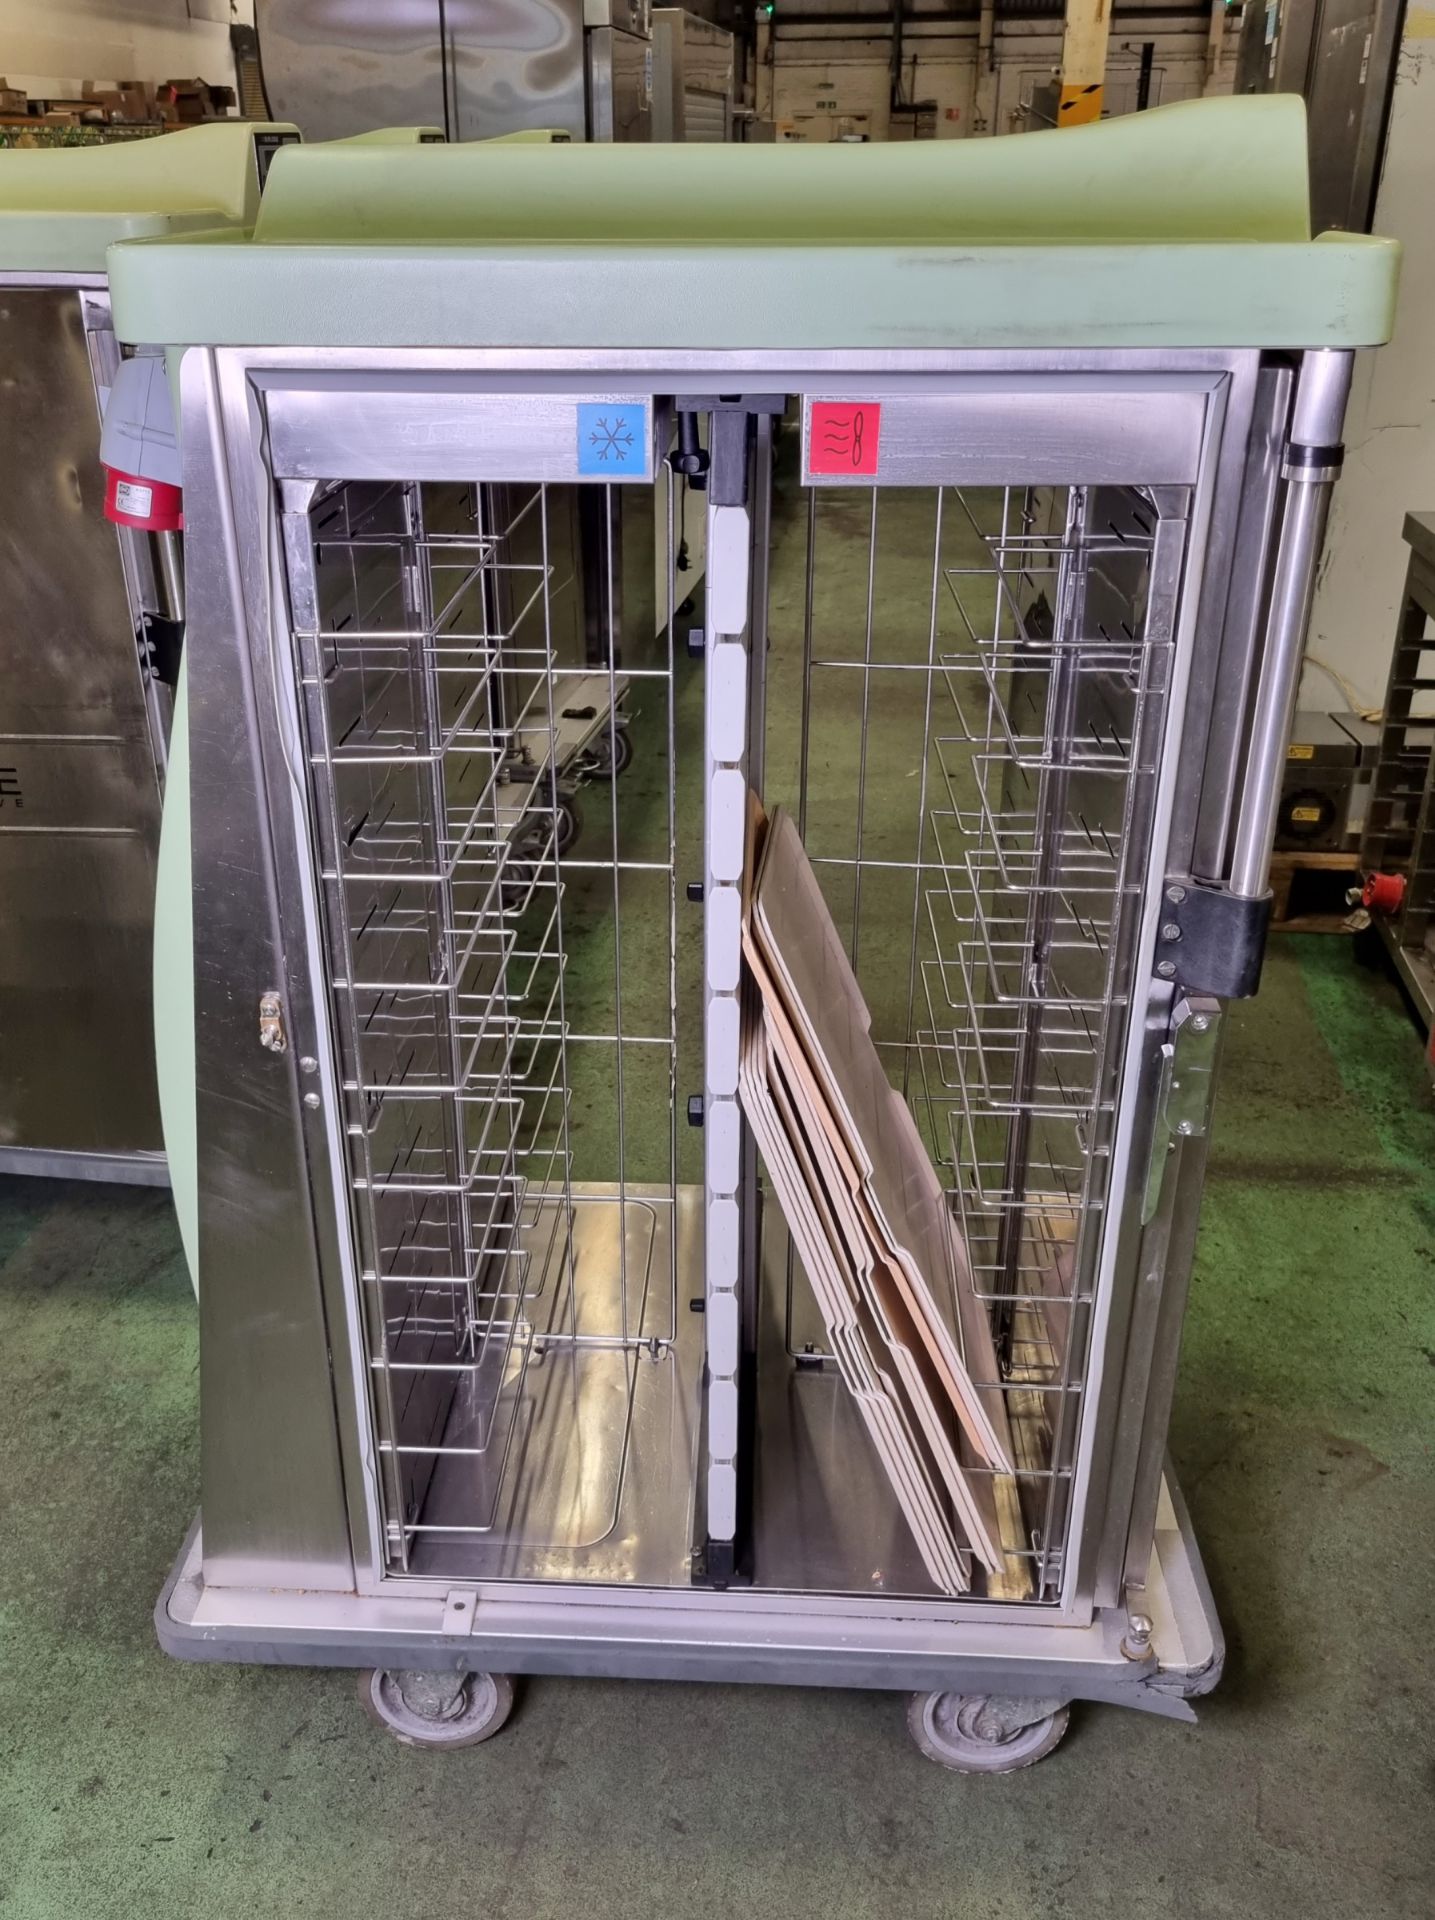 Burlodge RTS hot and cold tray delivery trolley - opens boths sides - W 800 x D 1100 x H 1500mm - Bild 2 aus 7